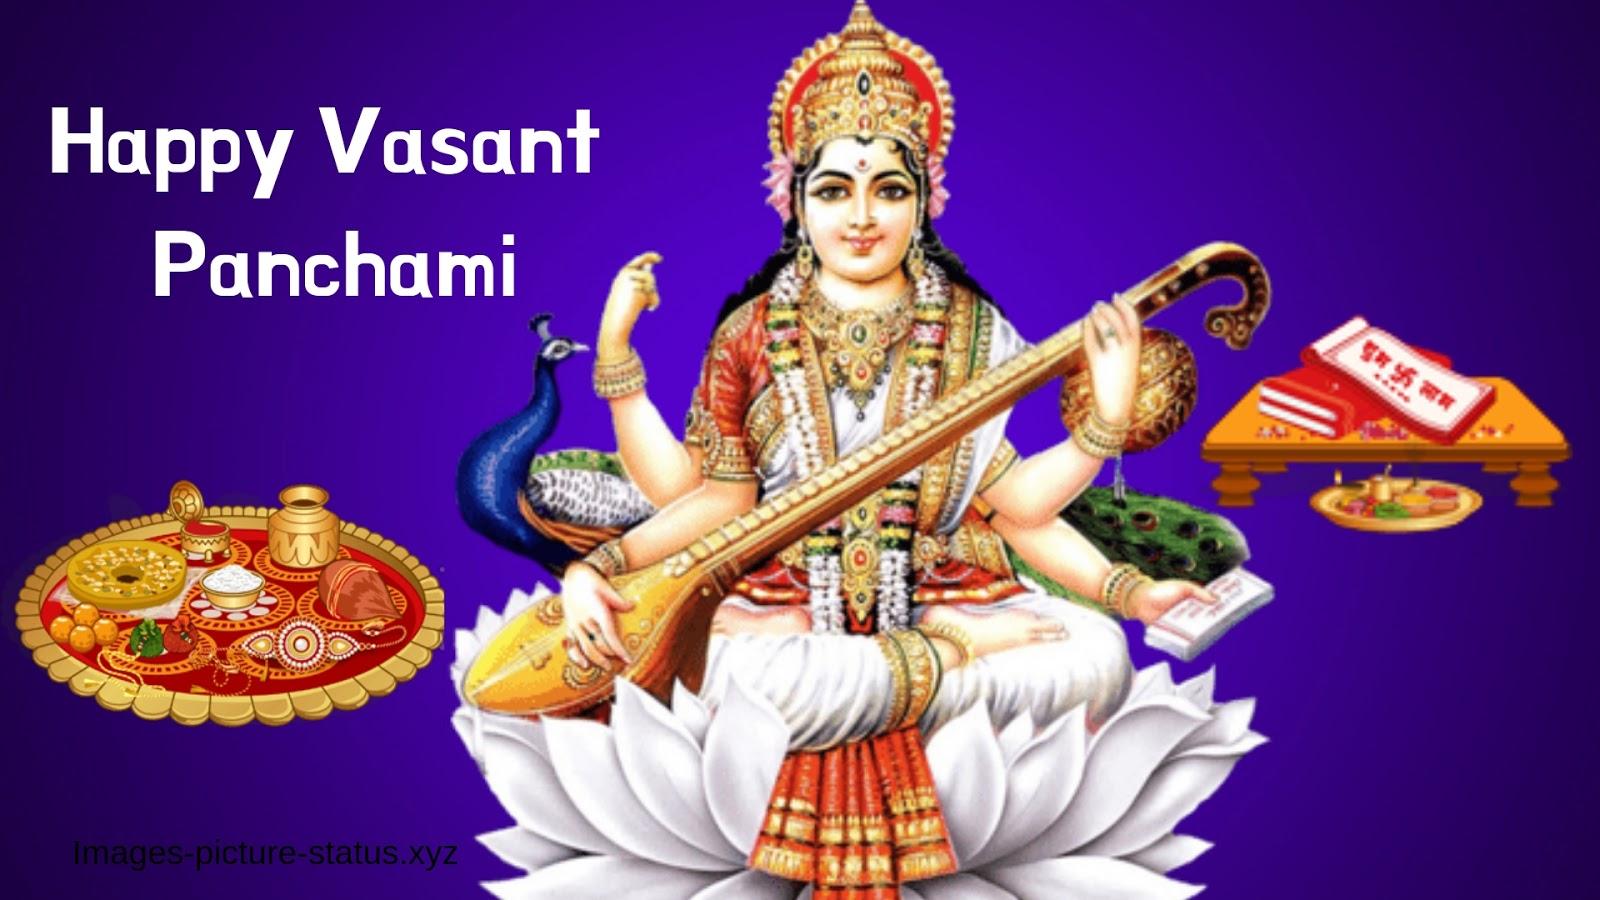 Happy Basant Panchami 2019 Wishes Image, GIF, Picture